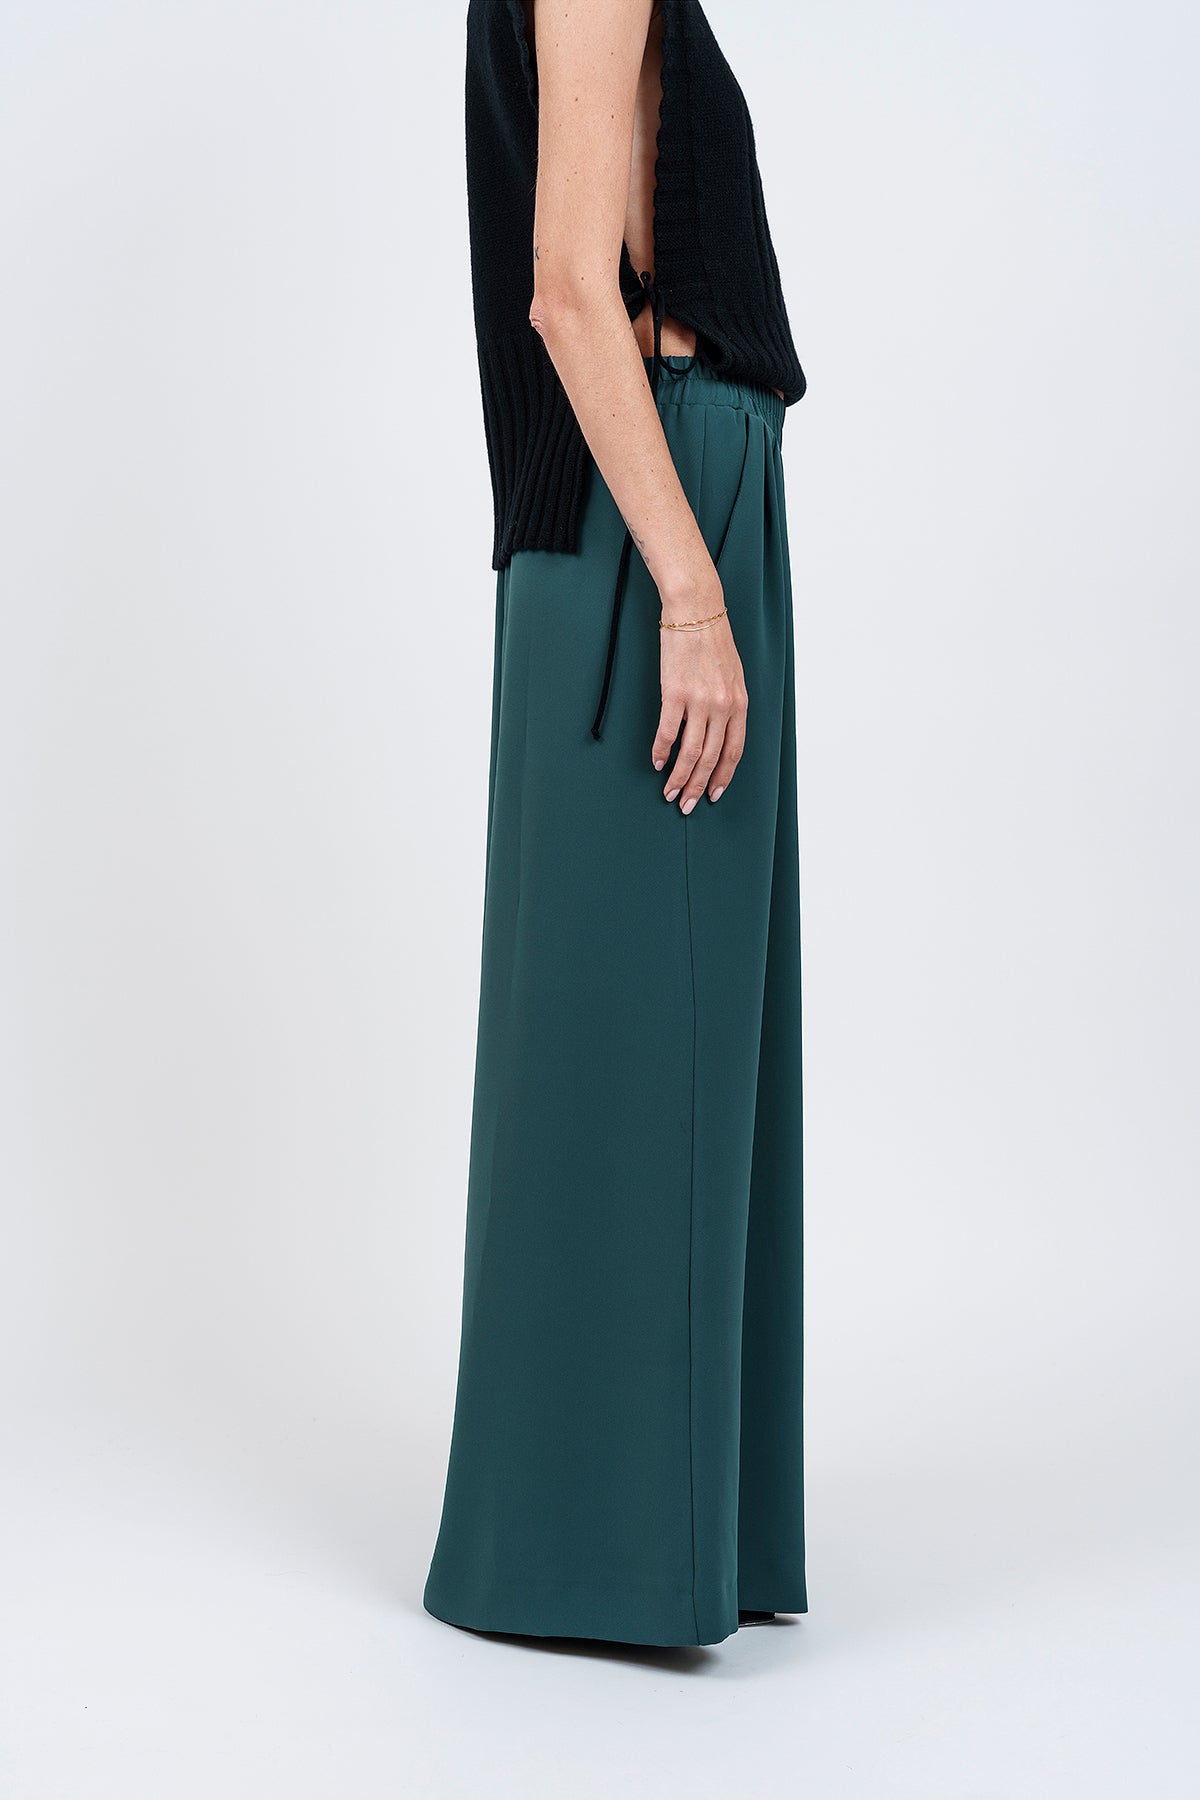 WIDE TROUSERS - green 